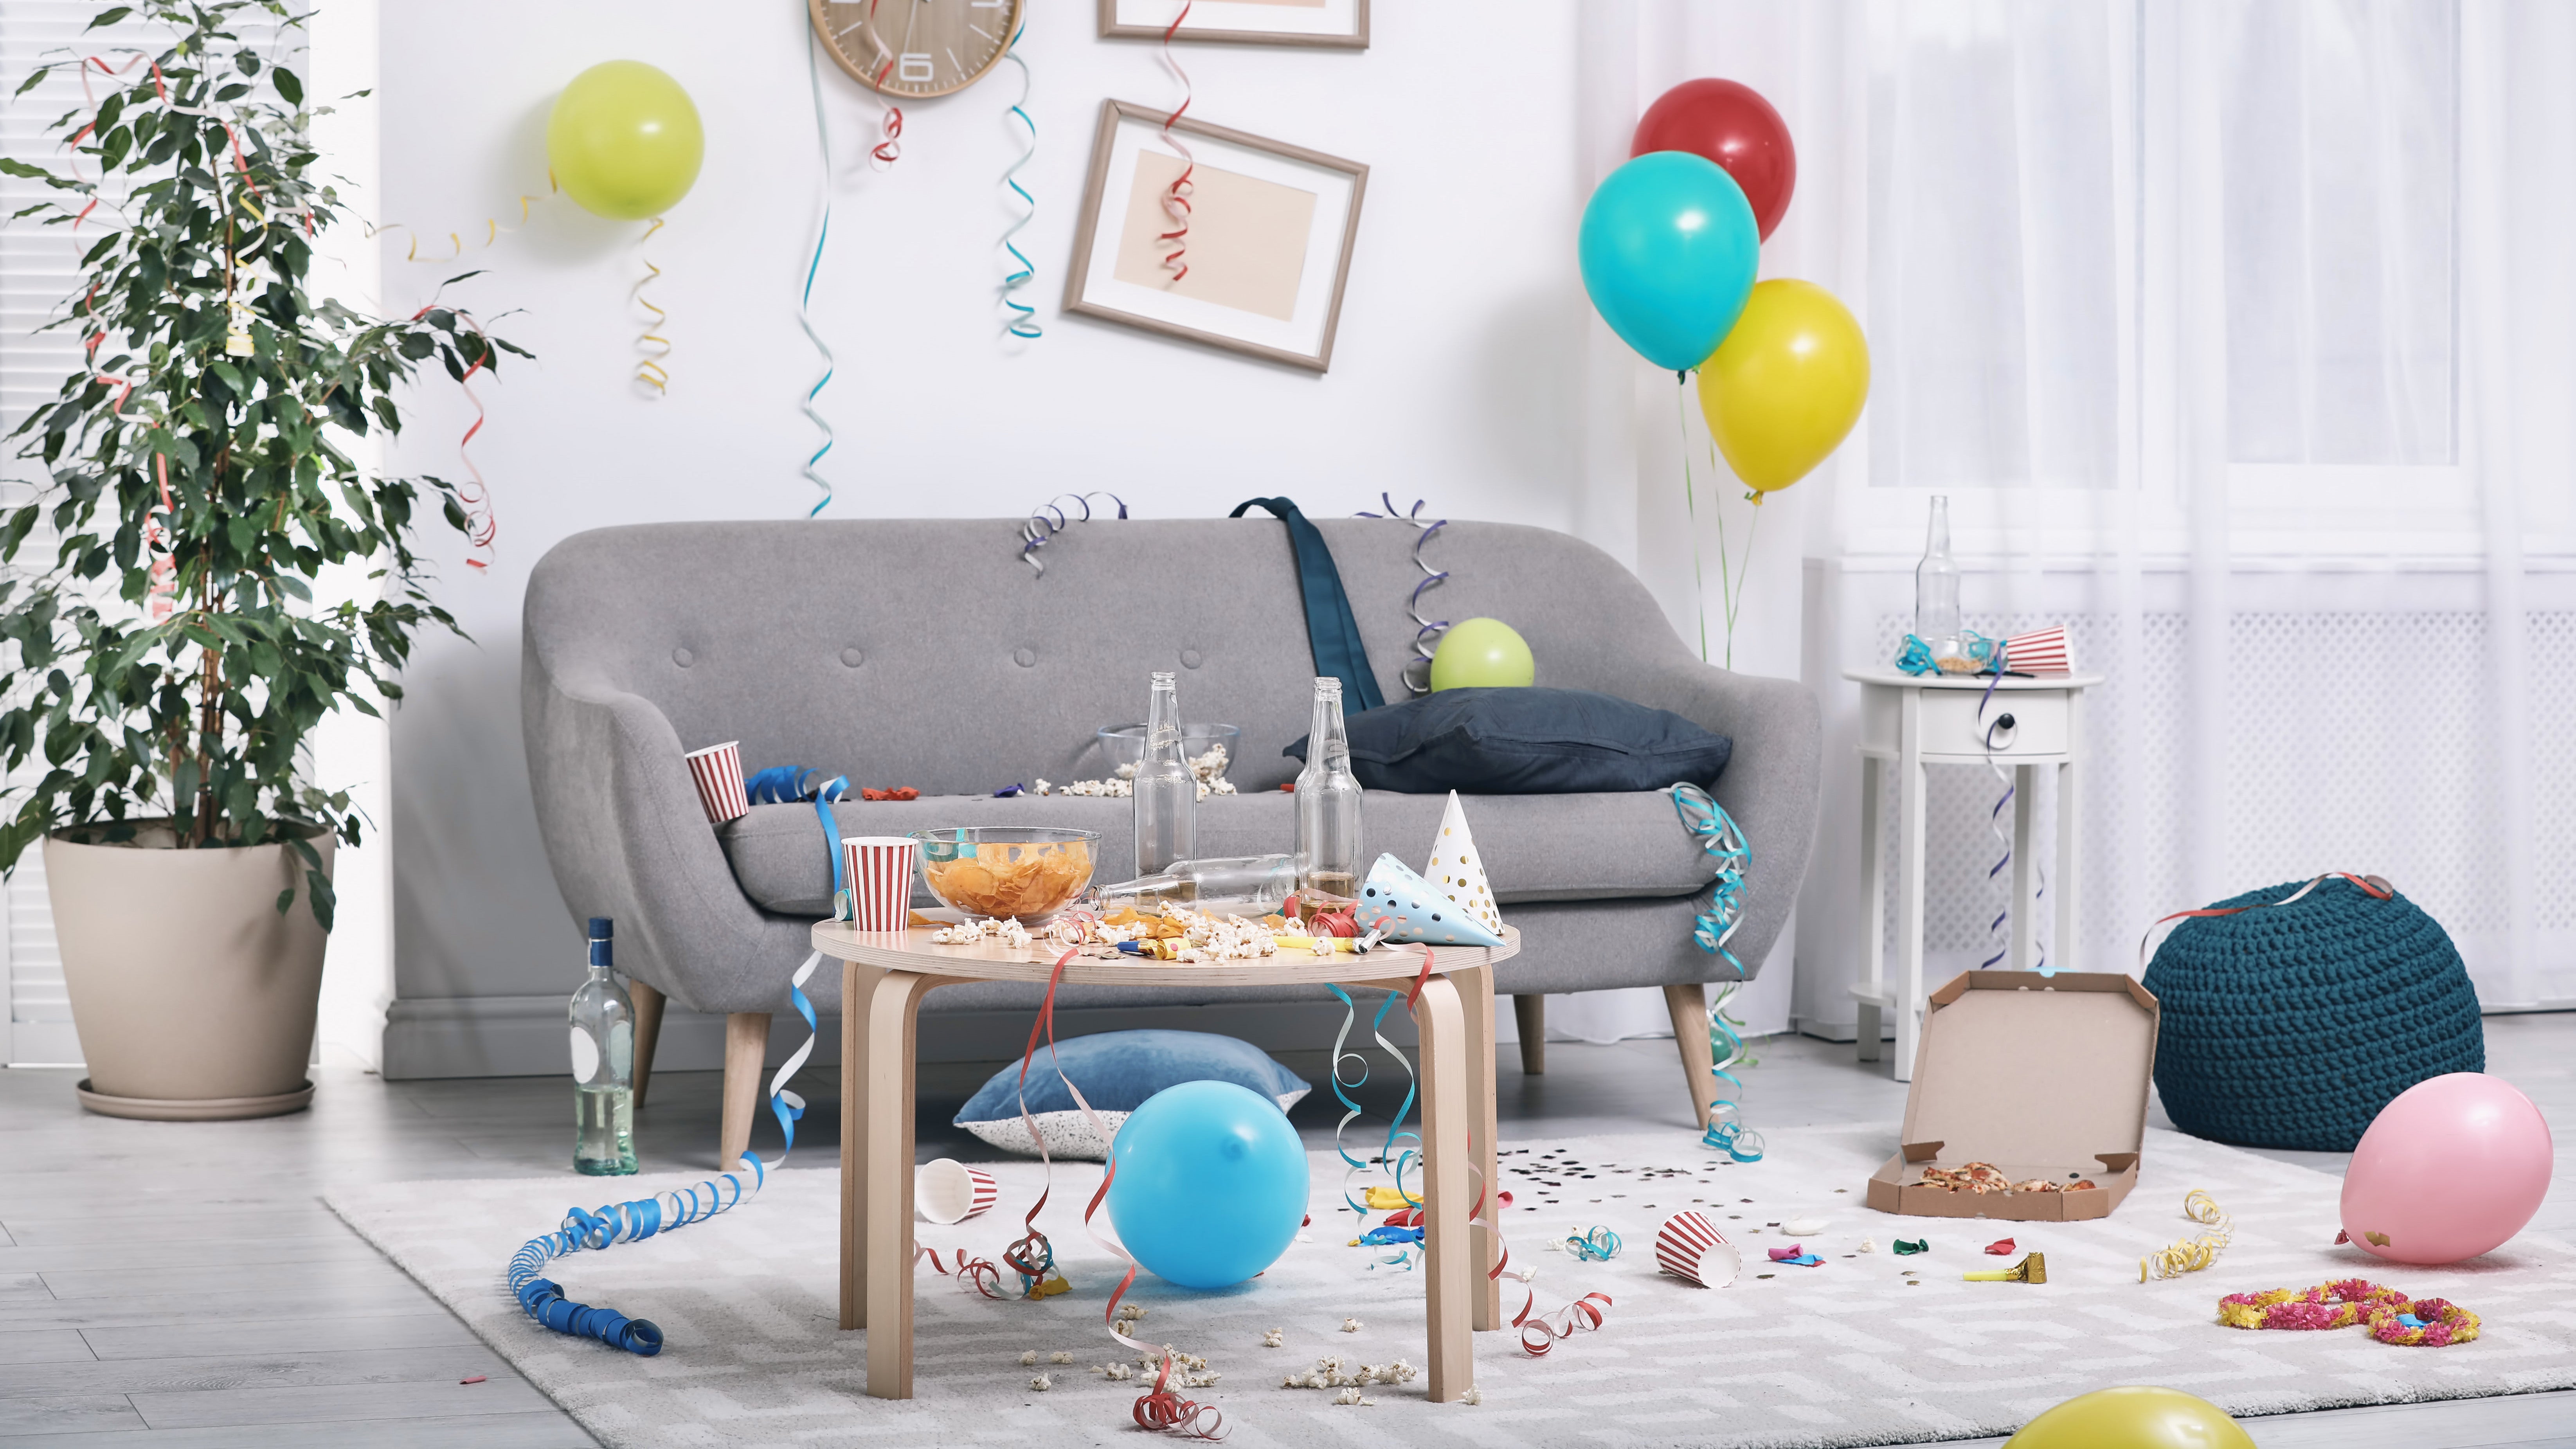 Cut Down On Household Clutter By Throwing A Downsizing Party